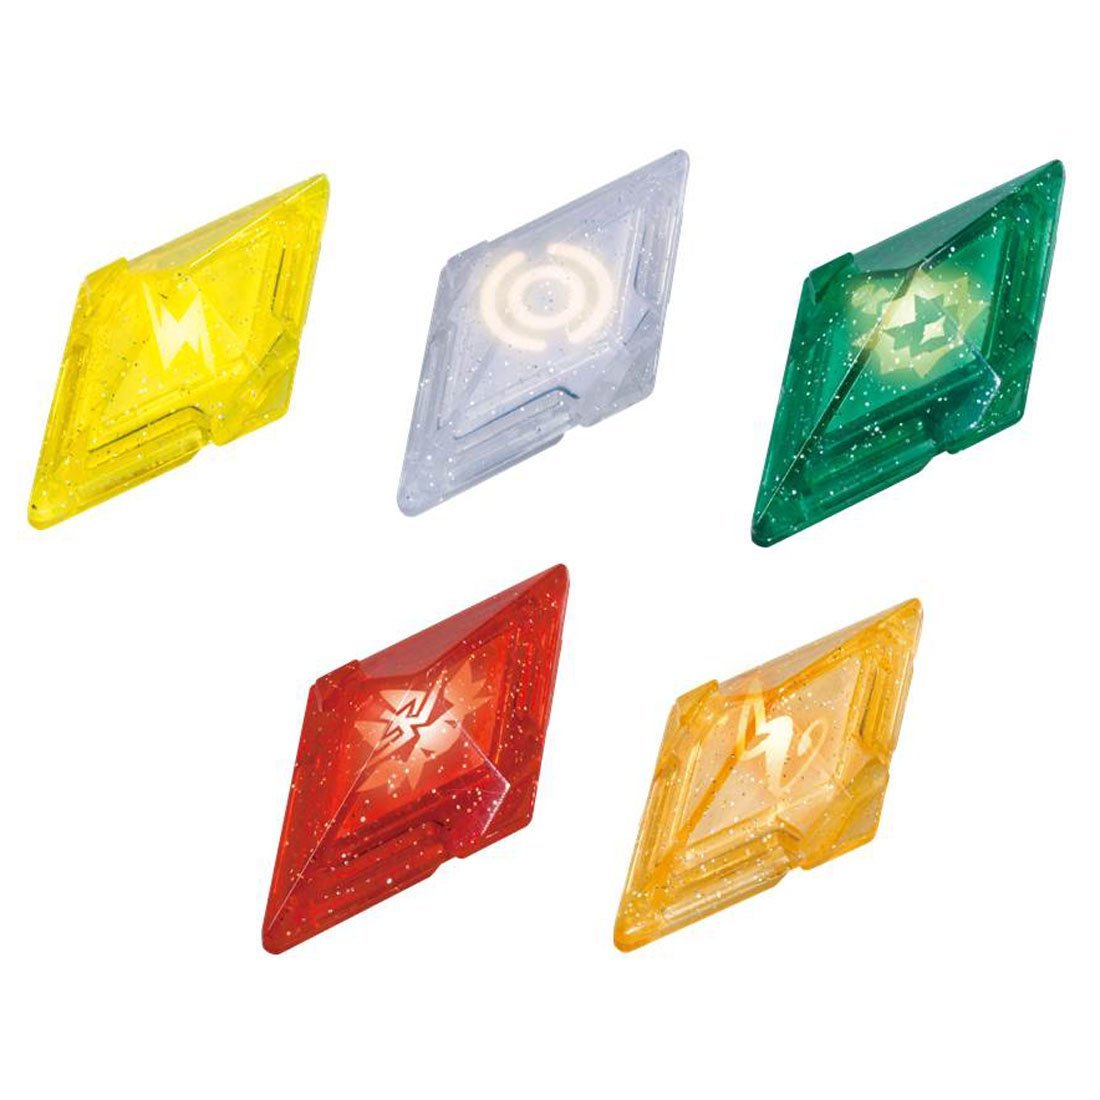 Have A Look At The Pokemon Z Power Ring Set And New Z